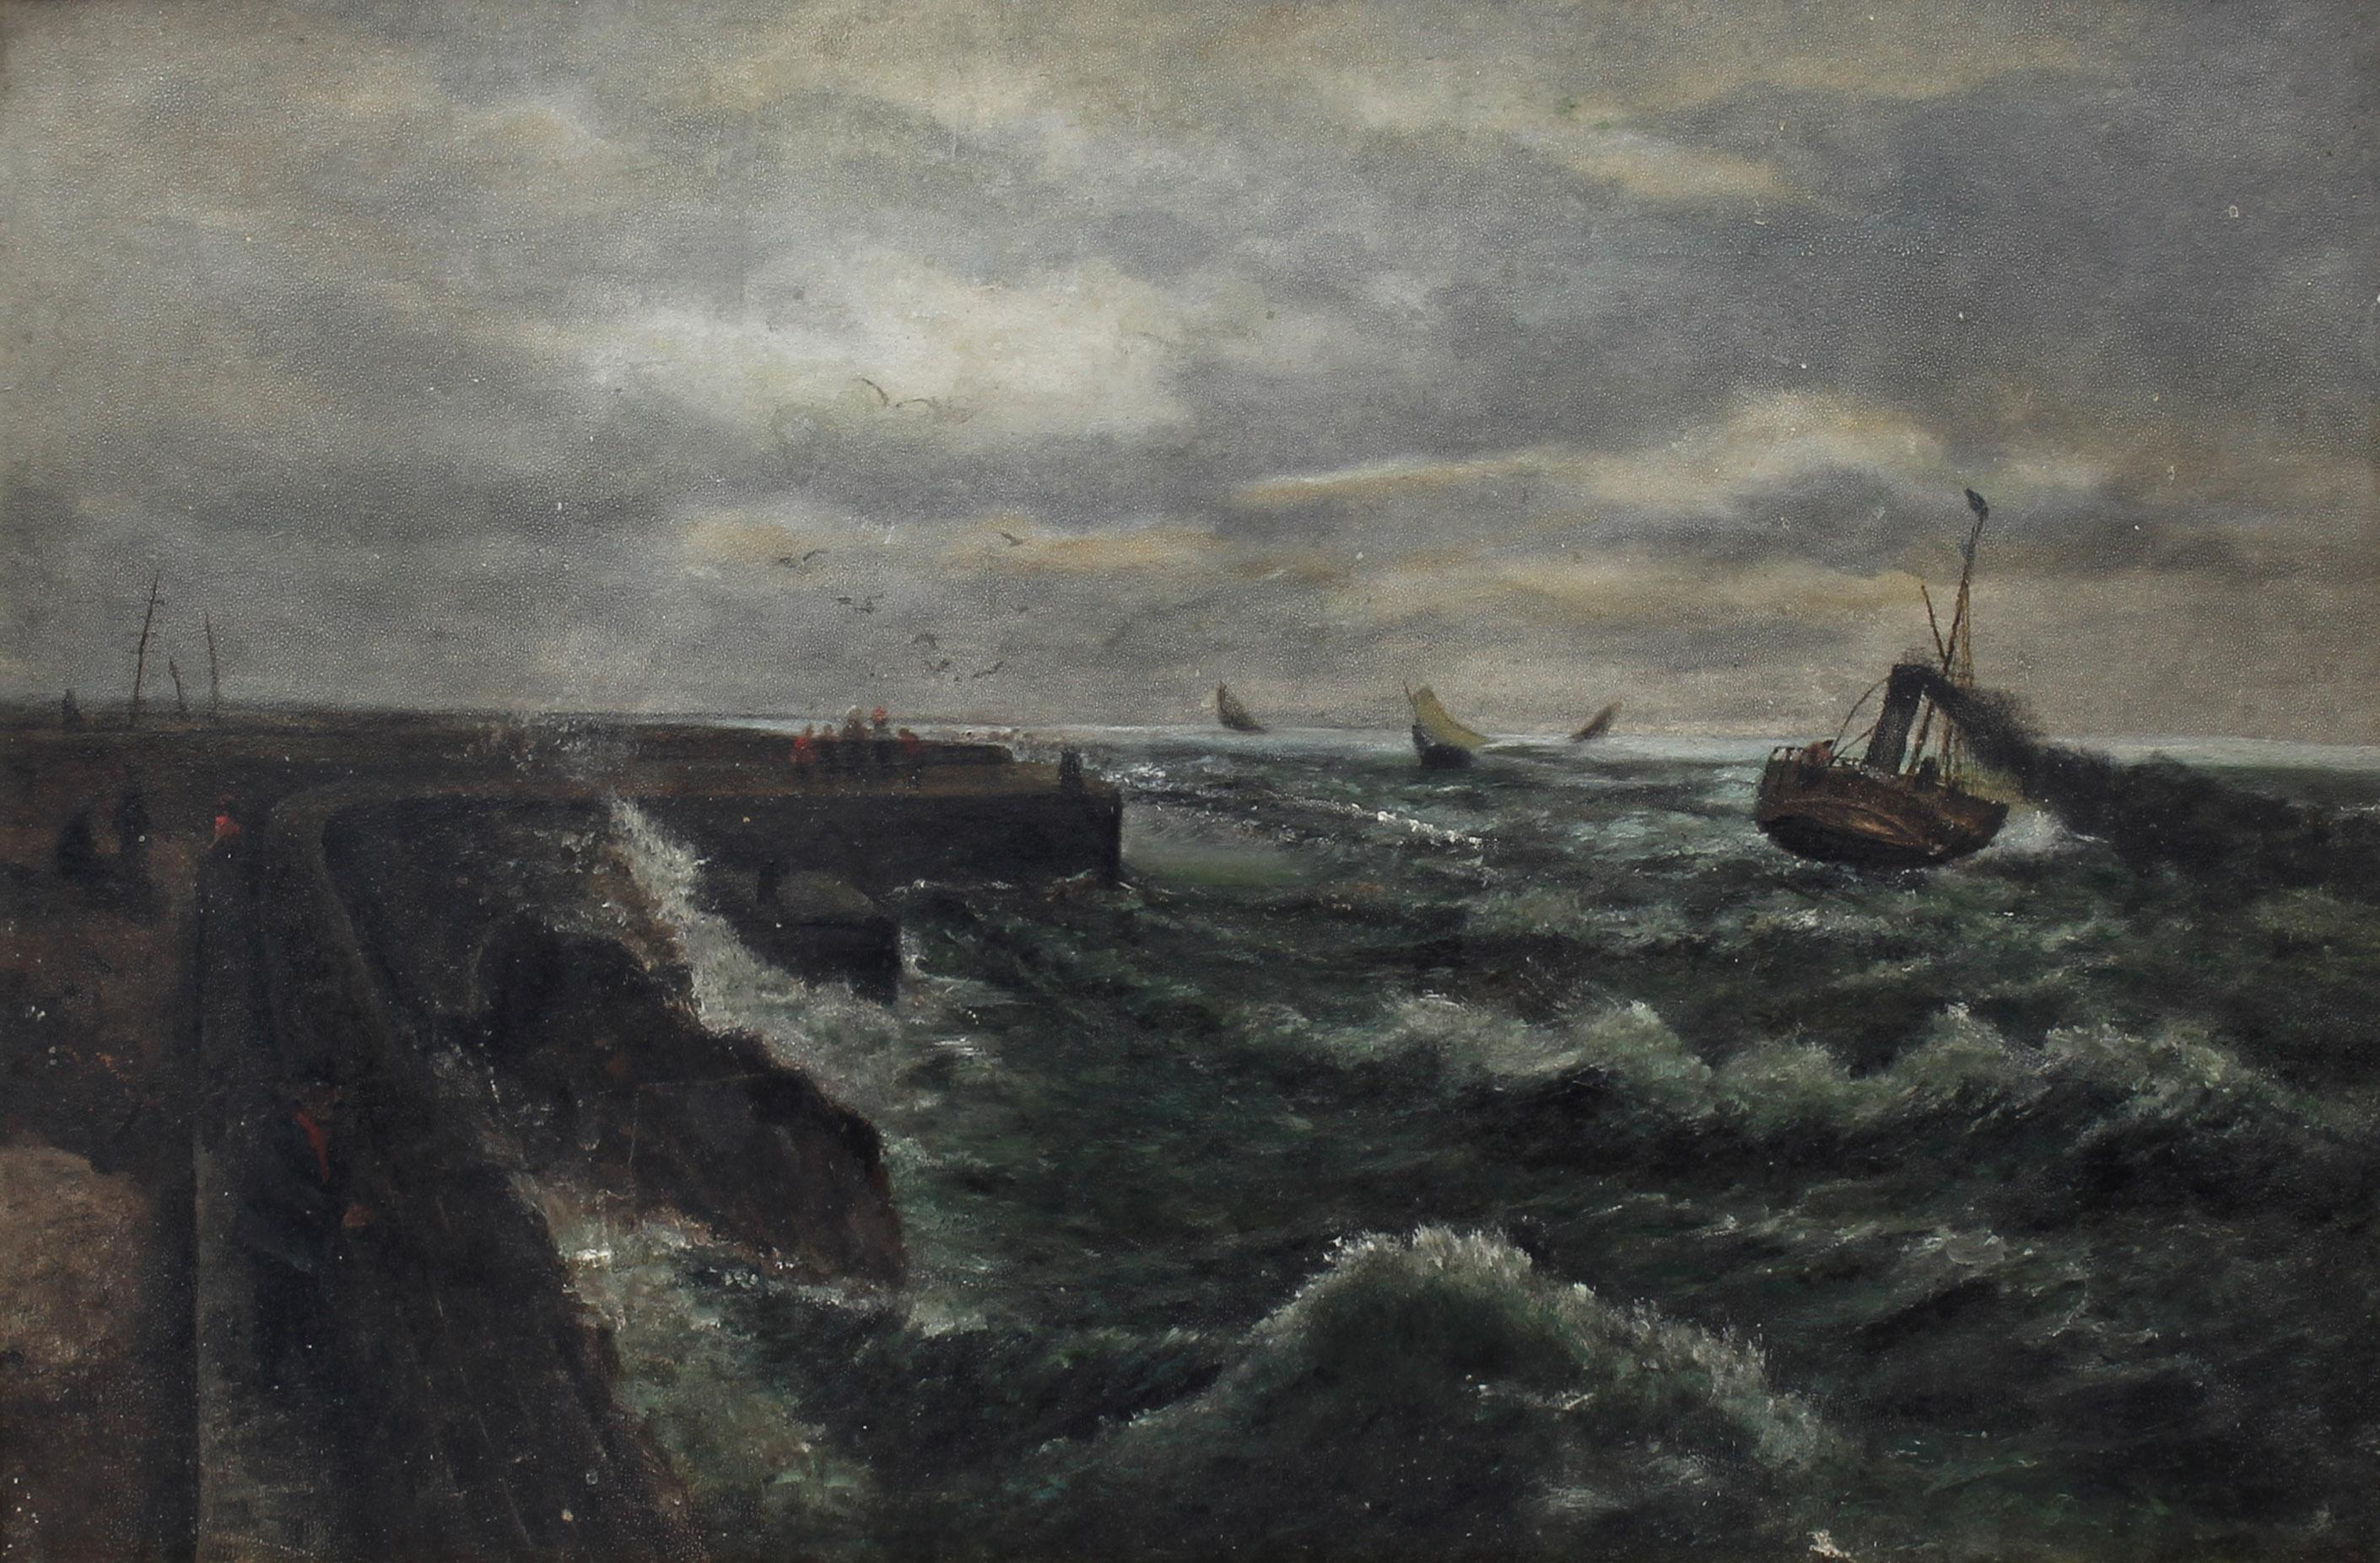 Stormy Day at Sea Tugboat Heading for Home - Painting by Unknown